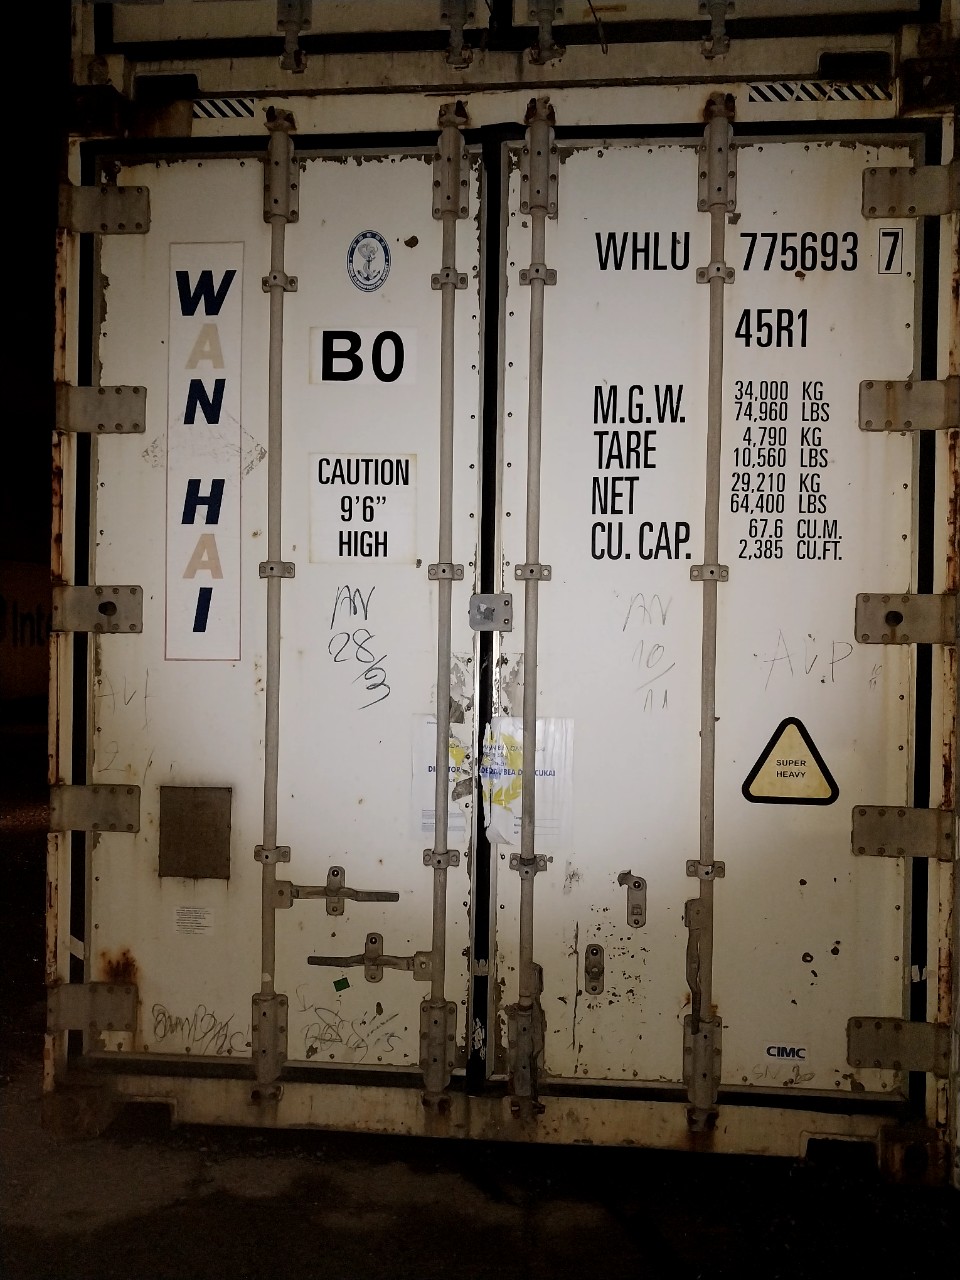 CONTAINER LẠNH 40RH WHLU7756937